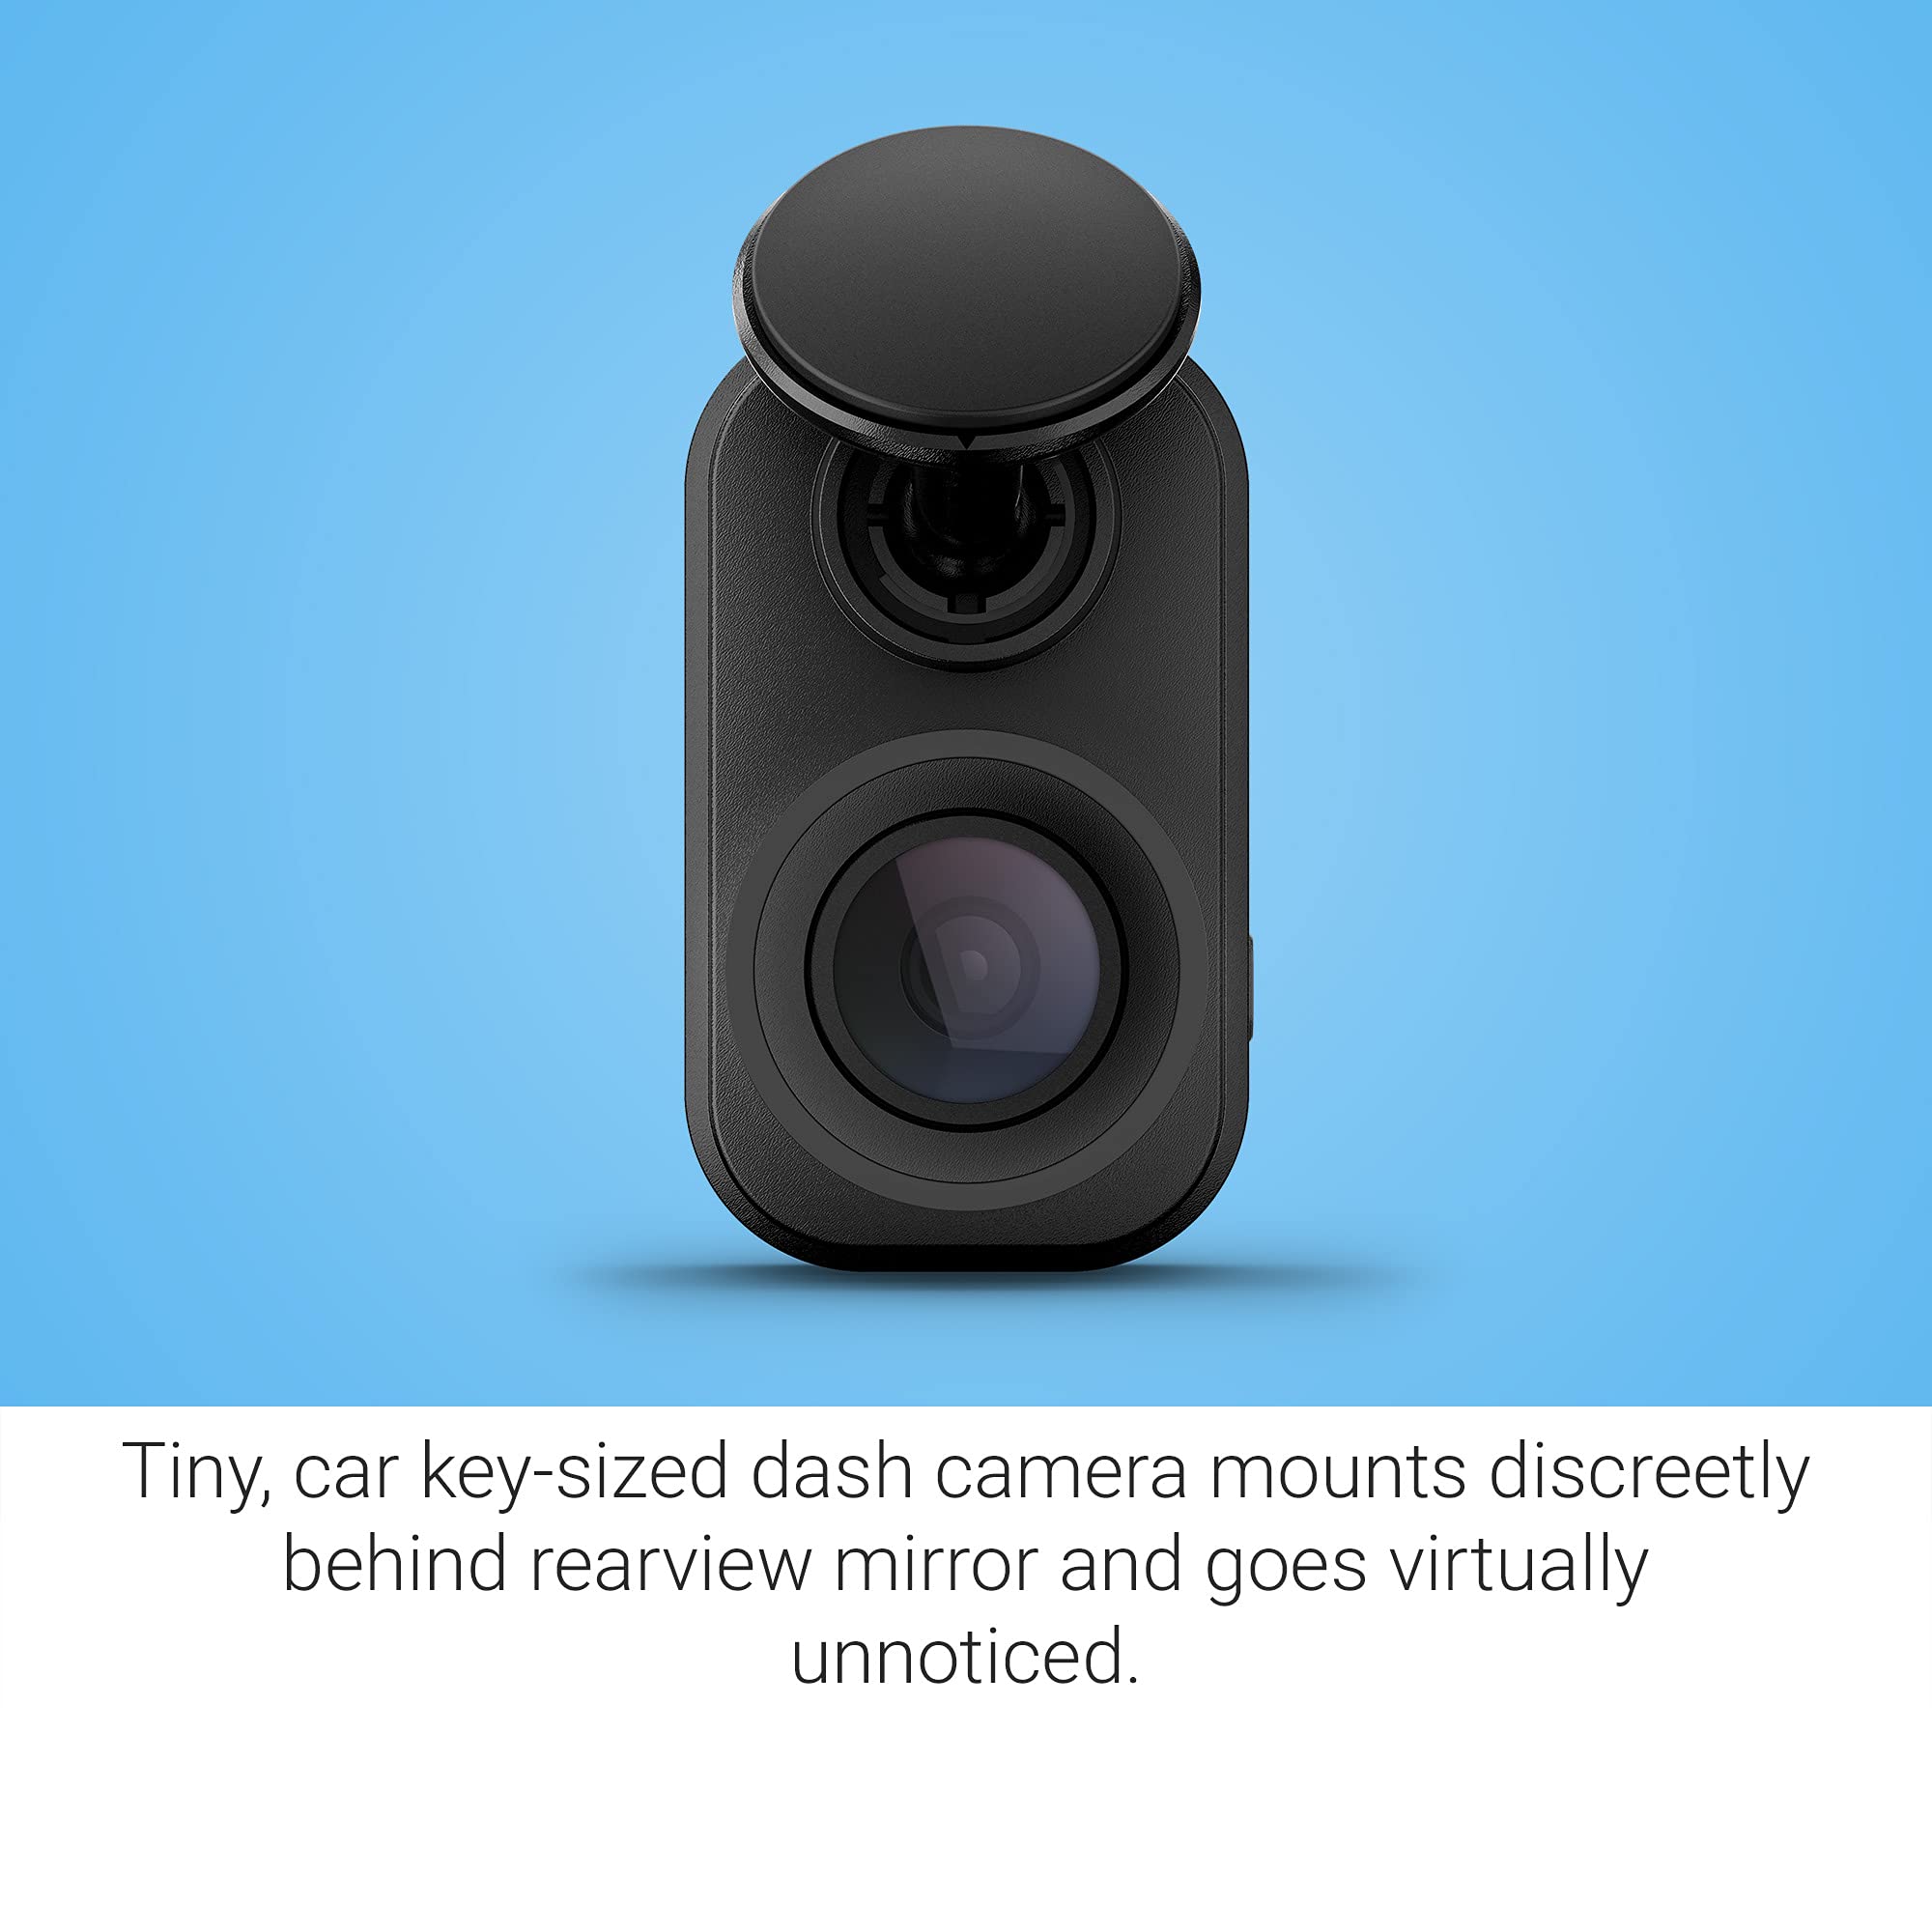 Garmin 010-02504-00 Dash Cam Mini 2, Tiny Size, 1080p and 140-degree FOV, Monitor Your Vehicle While Away w/ New Connected Features, Voice Control